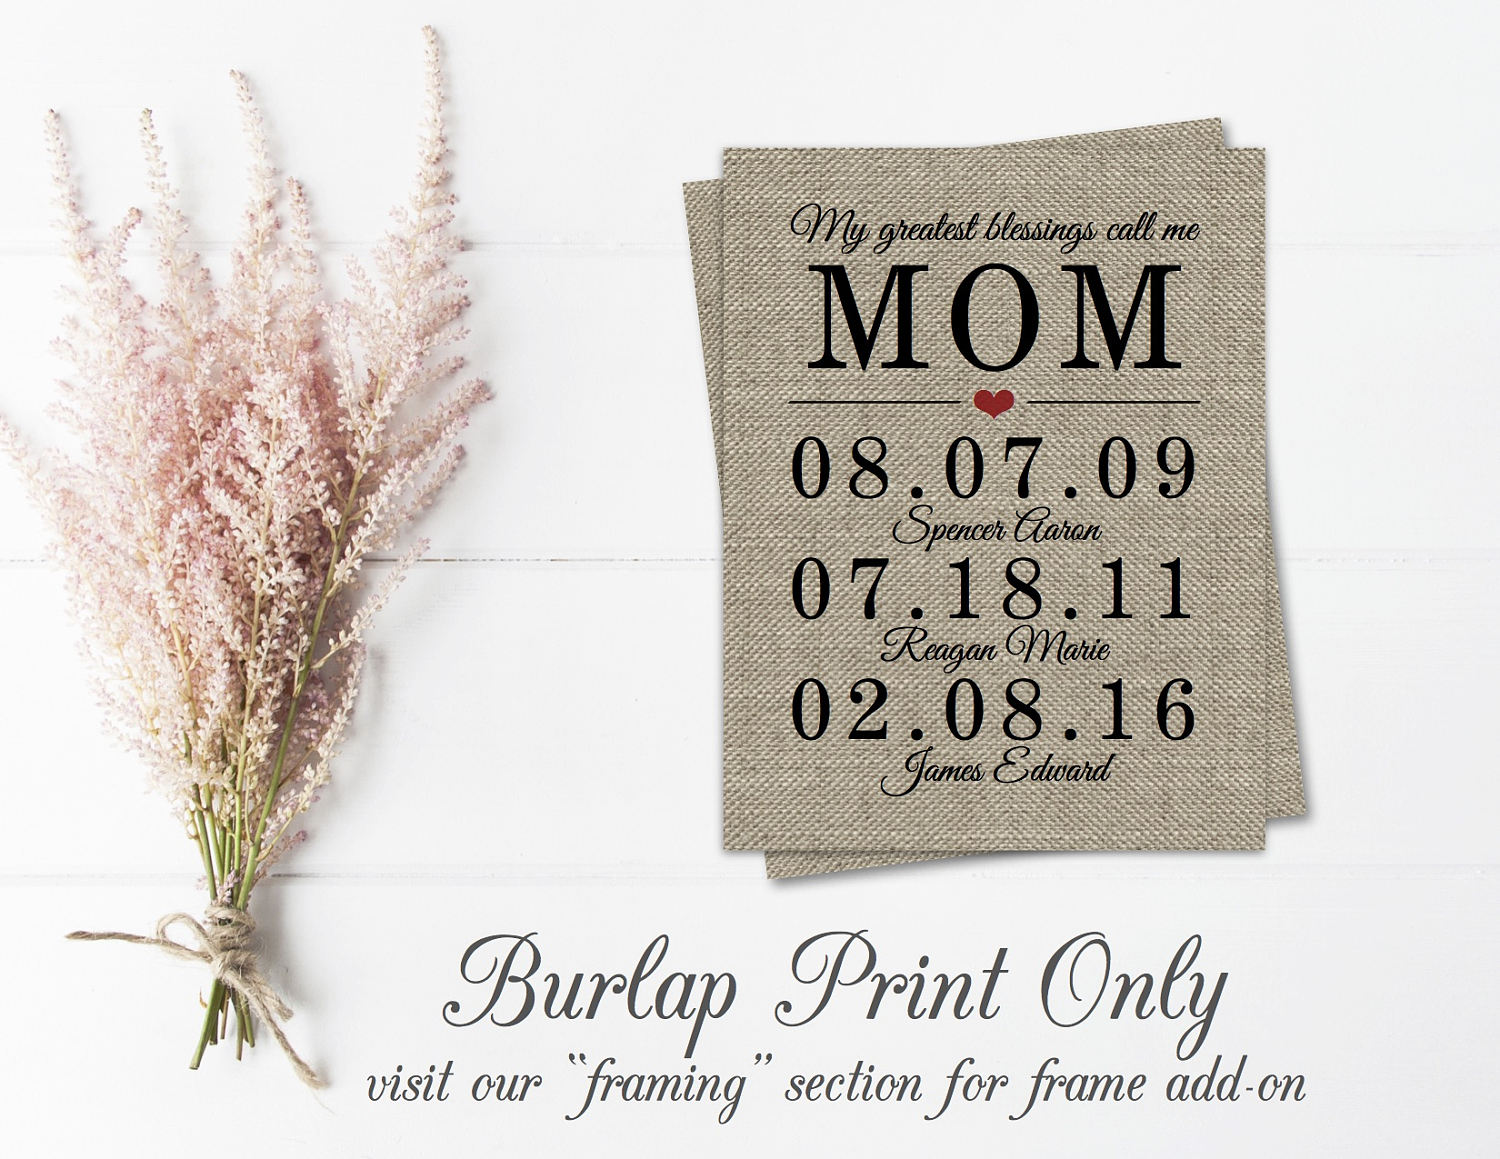 My Greatest Blessings Call Me Mom Burlap Print - Perfect for Mother's Day!